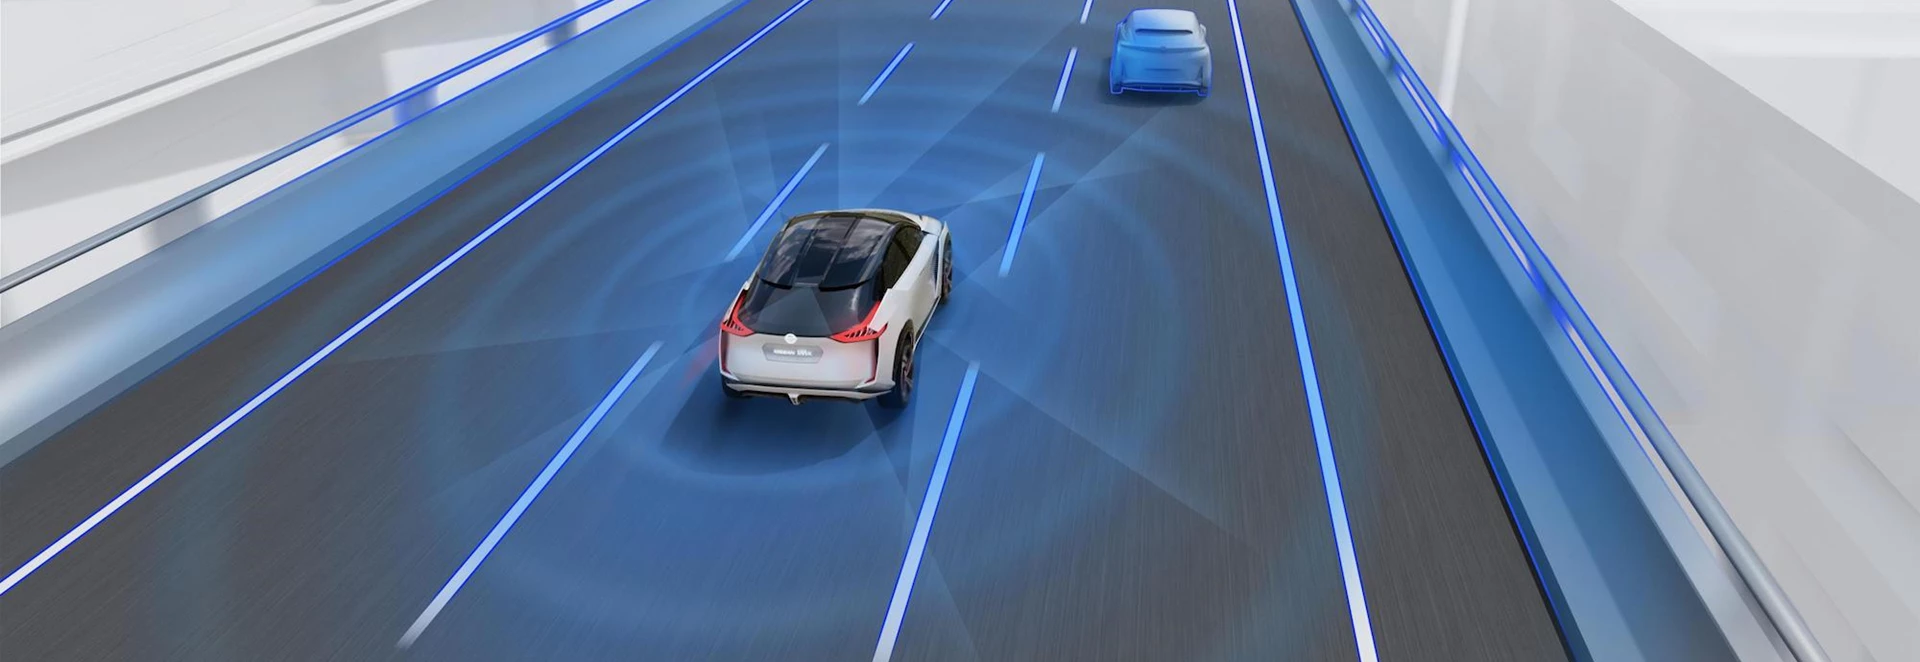 What is Nissan Intelligent Mobility?